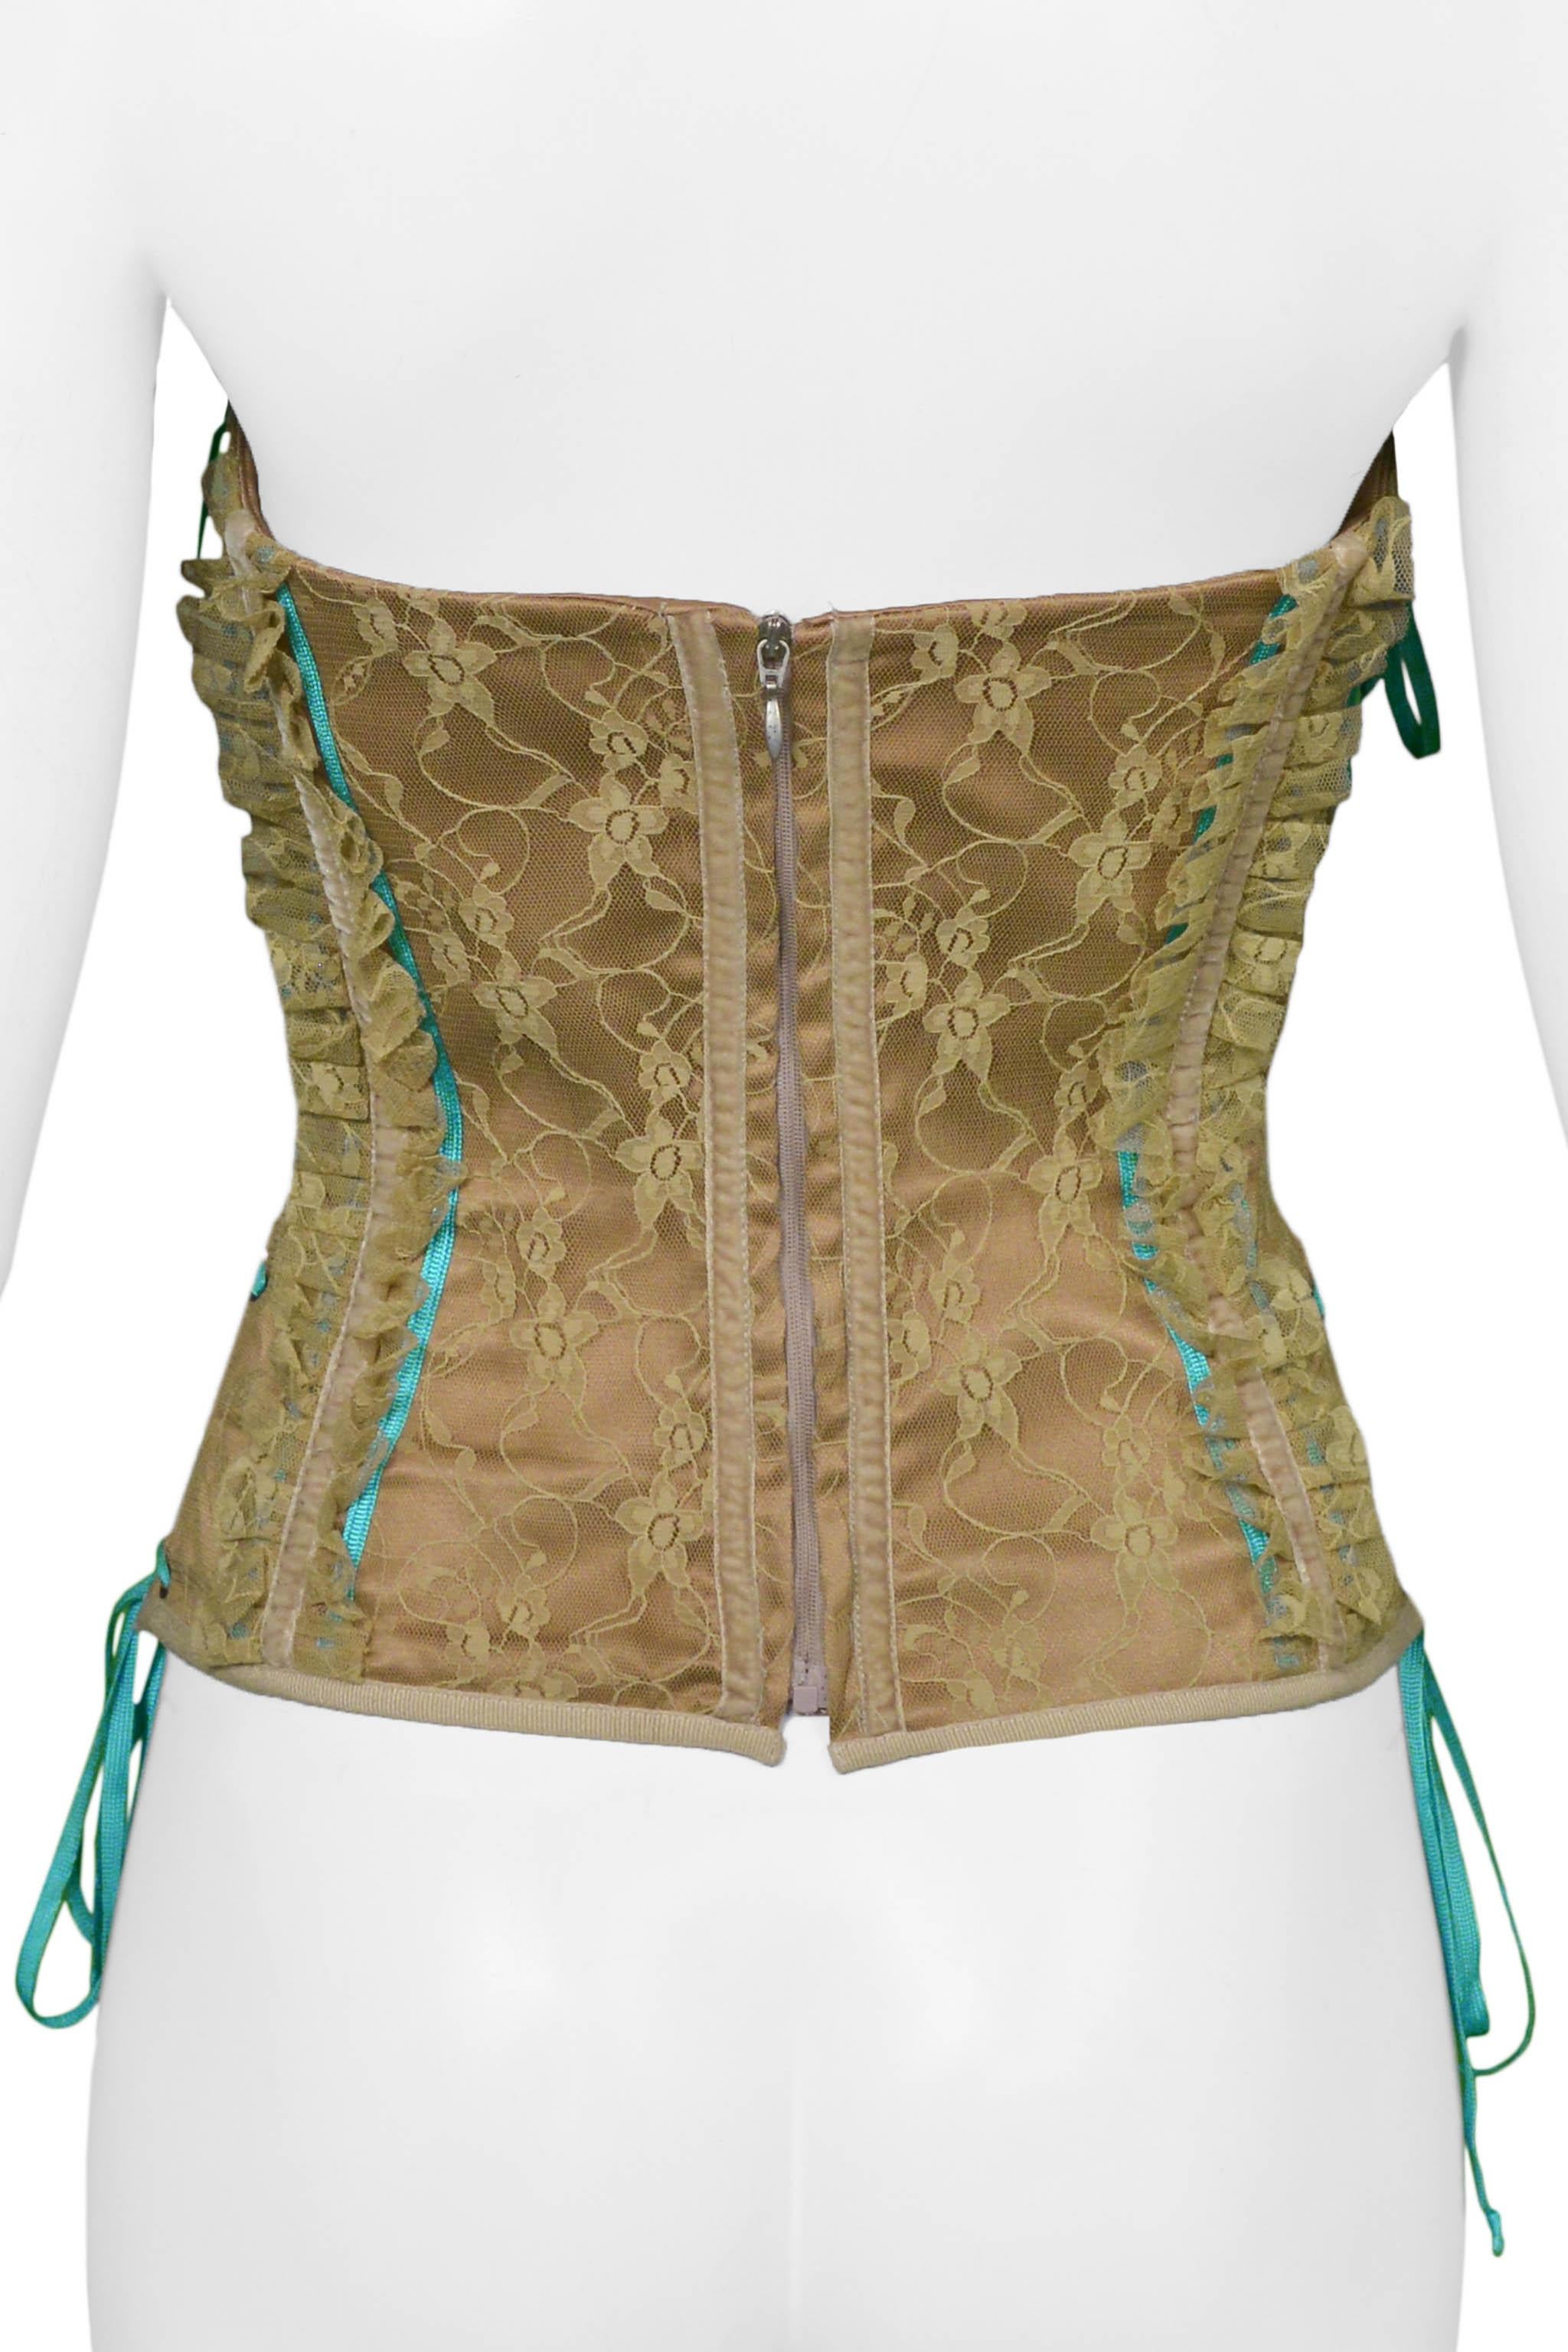 Dolce & Gabbana Lace Corset Top With Blue Laces 2002 For Sale 1